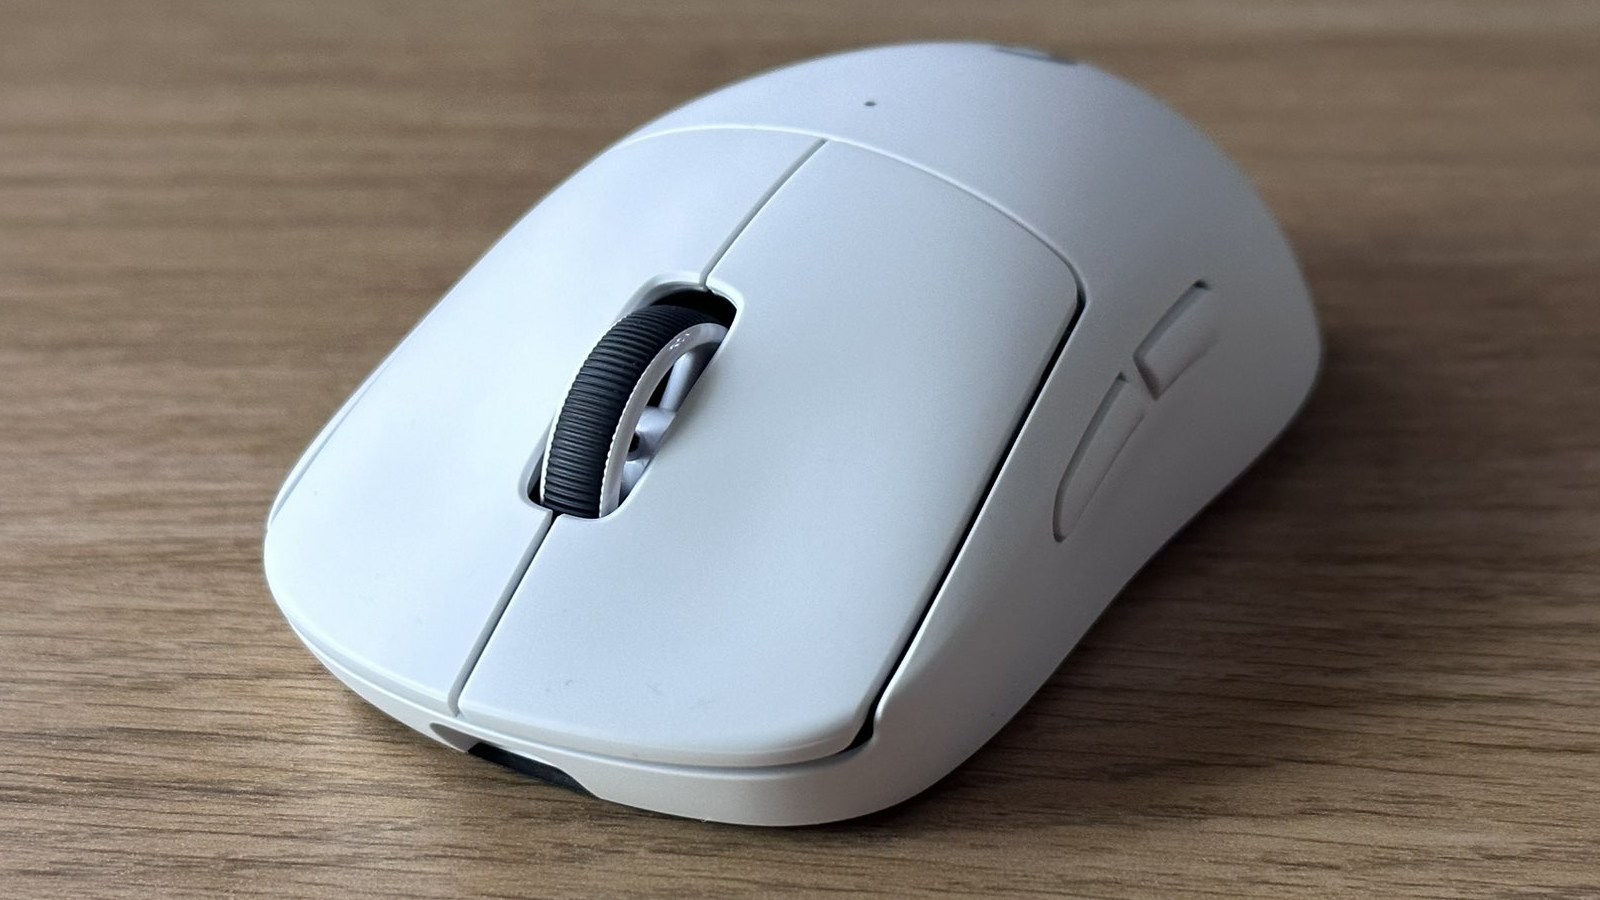 Endgame Gear XM2we review: The ultimate claw grip mouse - Dexerto